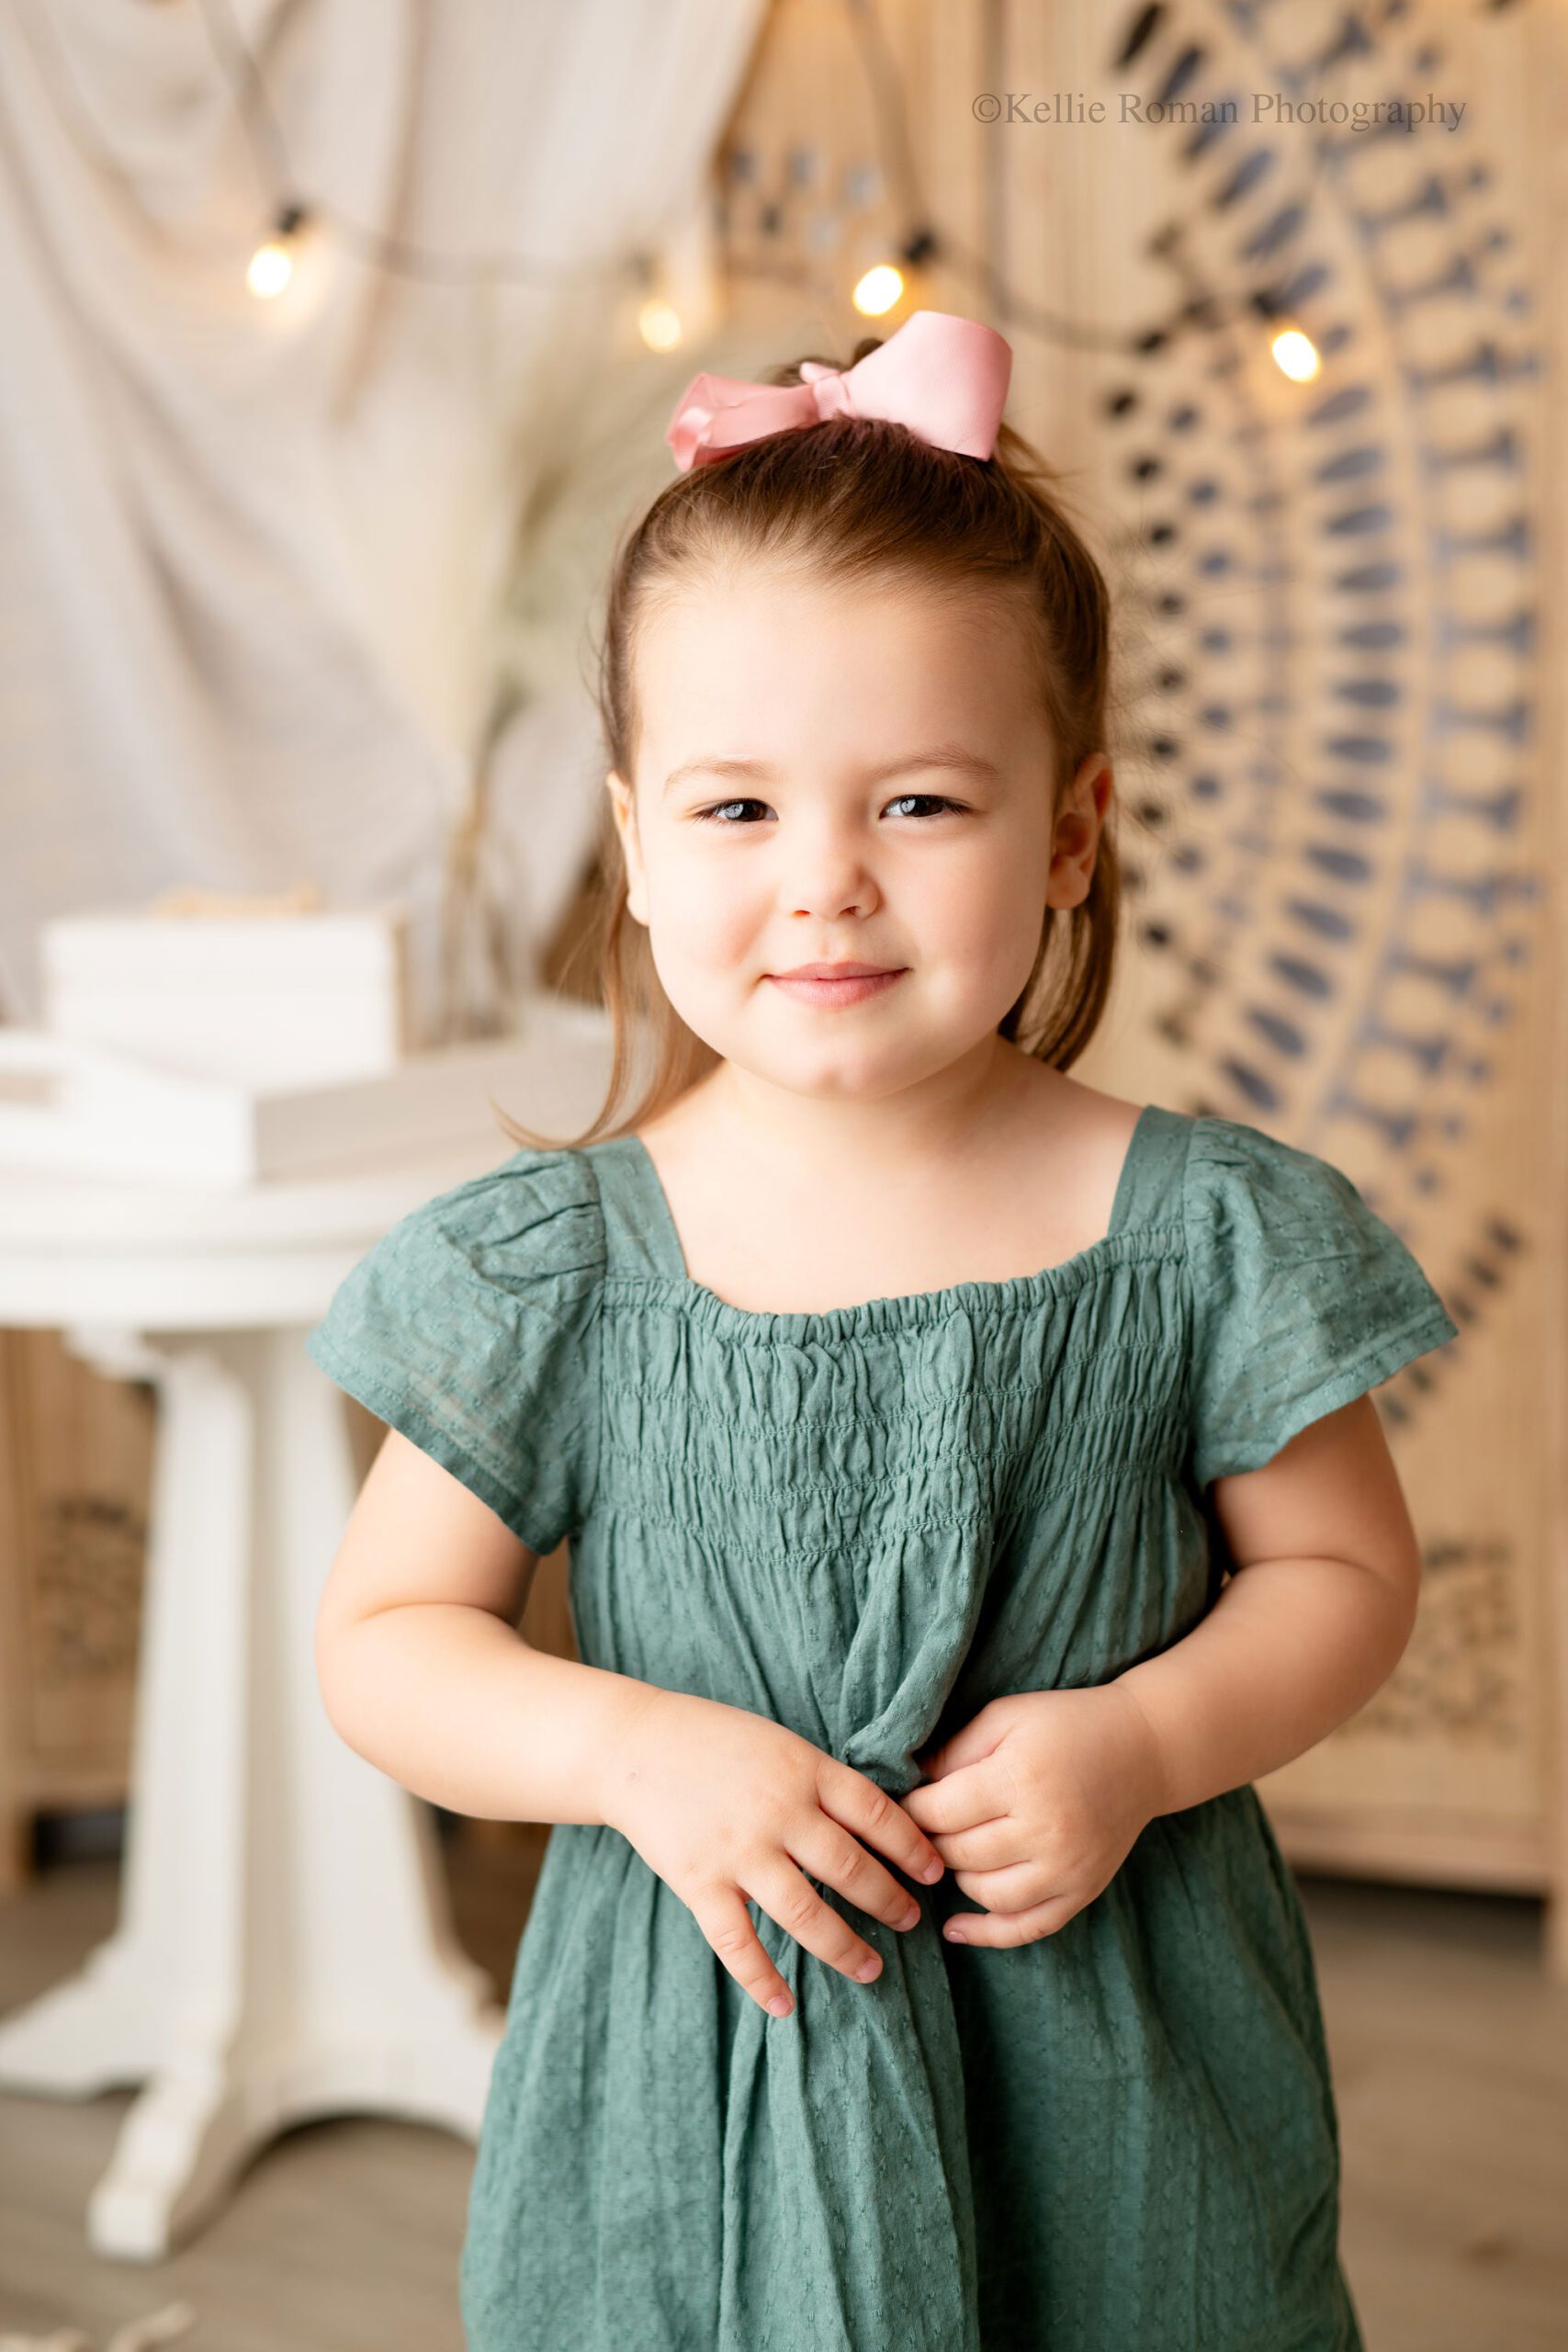 photographer near me. three year old girl is looking at camera and smiling slightly. she has an olive green dress on and is holding onto it a little with her hands. she has a light pink bow in her hair. the background is wood decorative piece and a white wood table.